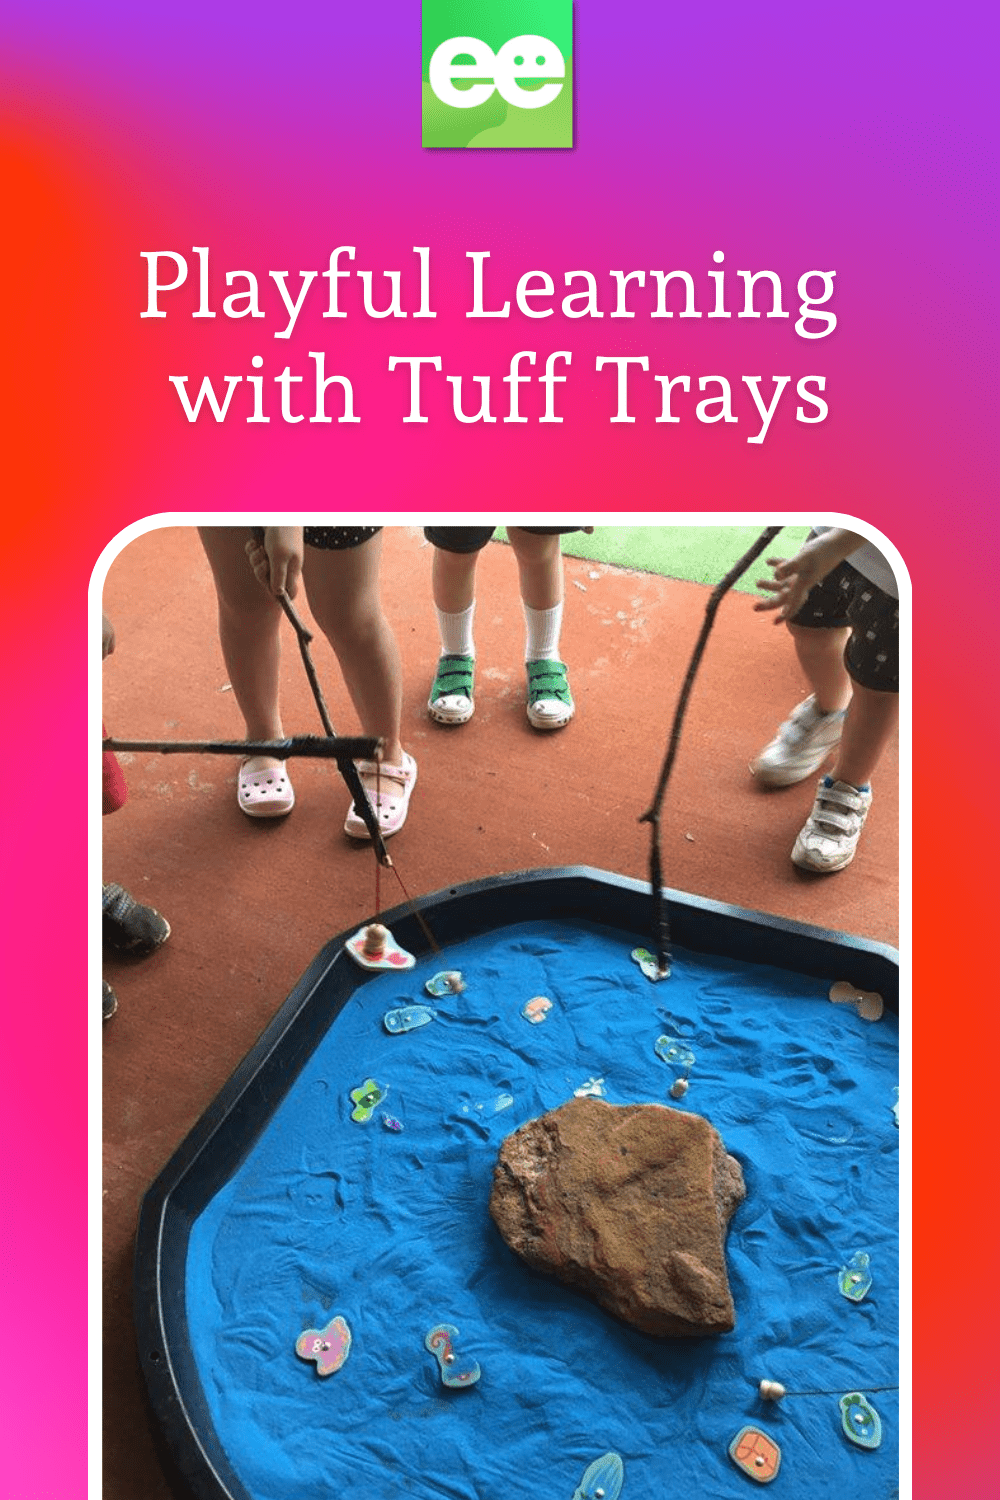 use Tuff Trays to invite playful learnin